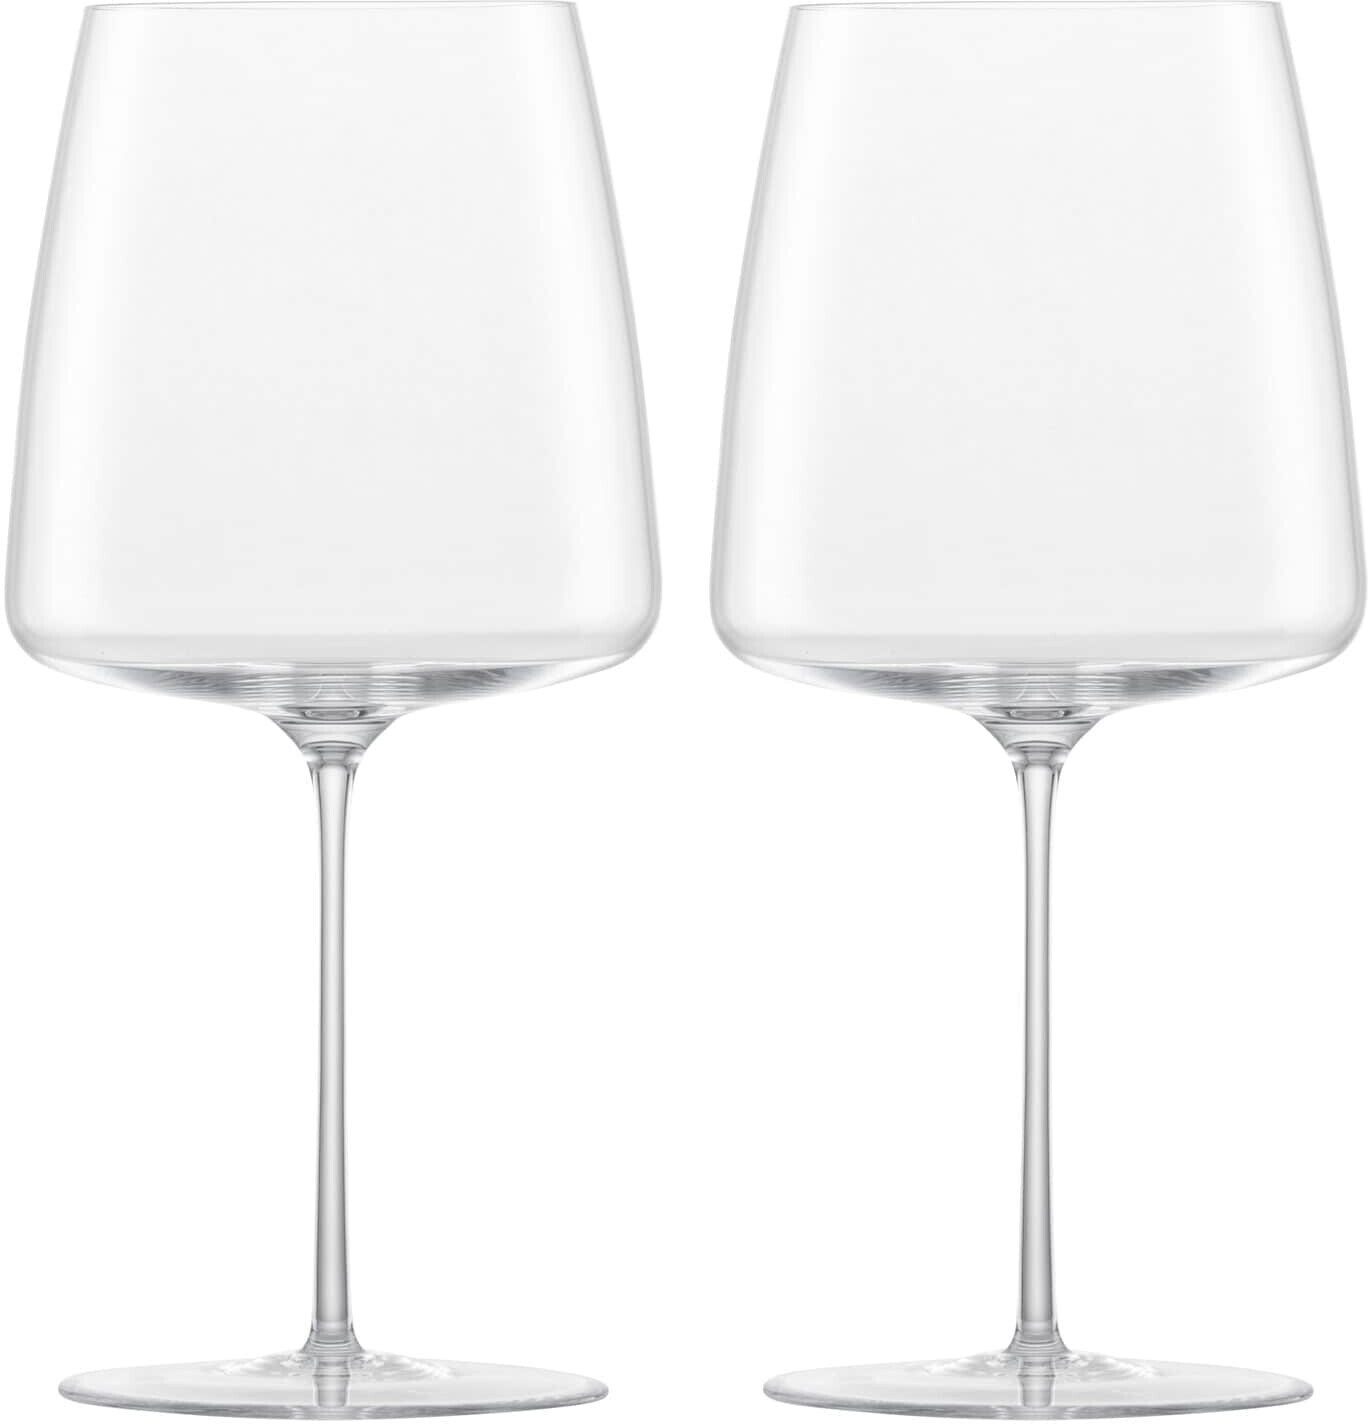 Simplify Champagne Glasses 40 cl, 2-pack - Zwiesel @ RoyalDesign